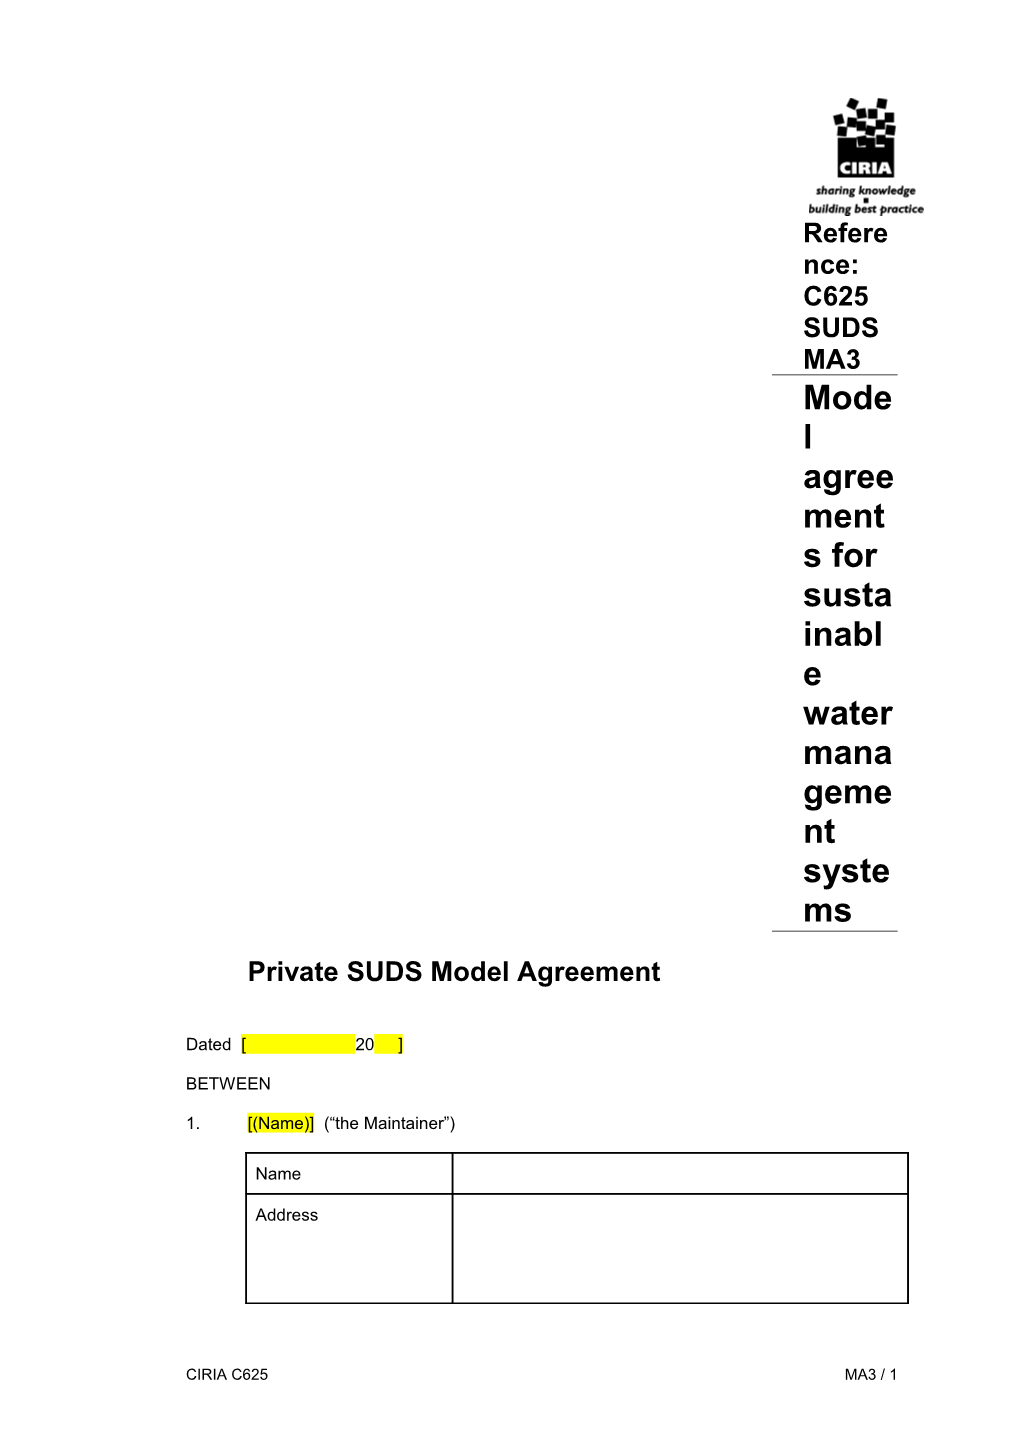 Model Agreements for Sustainable Water Management Systems